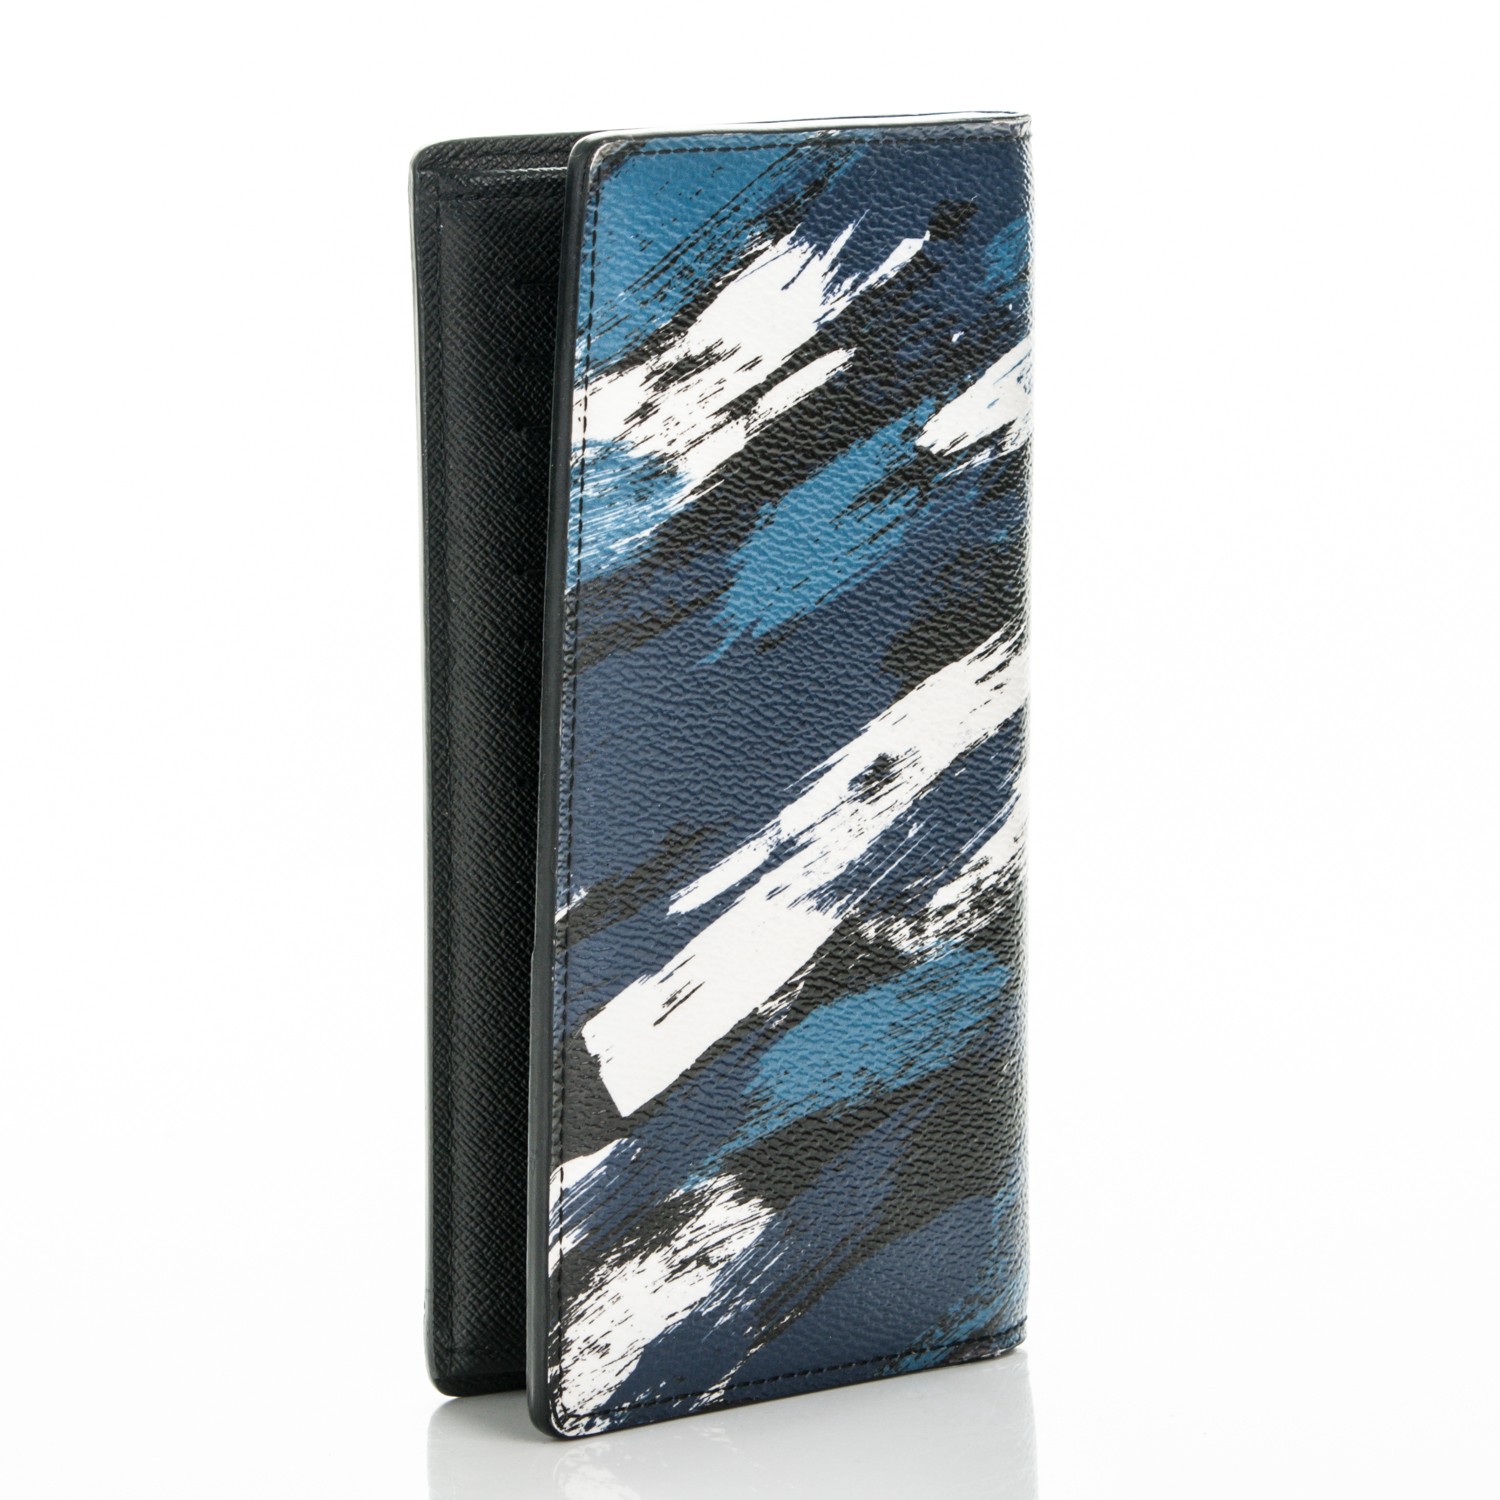 LOUIS VUITTON Canvas Printed Brushstroke Camouflage Brazza Wallet Blue 179978